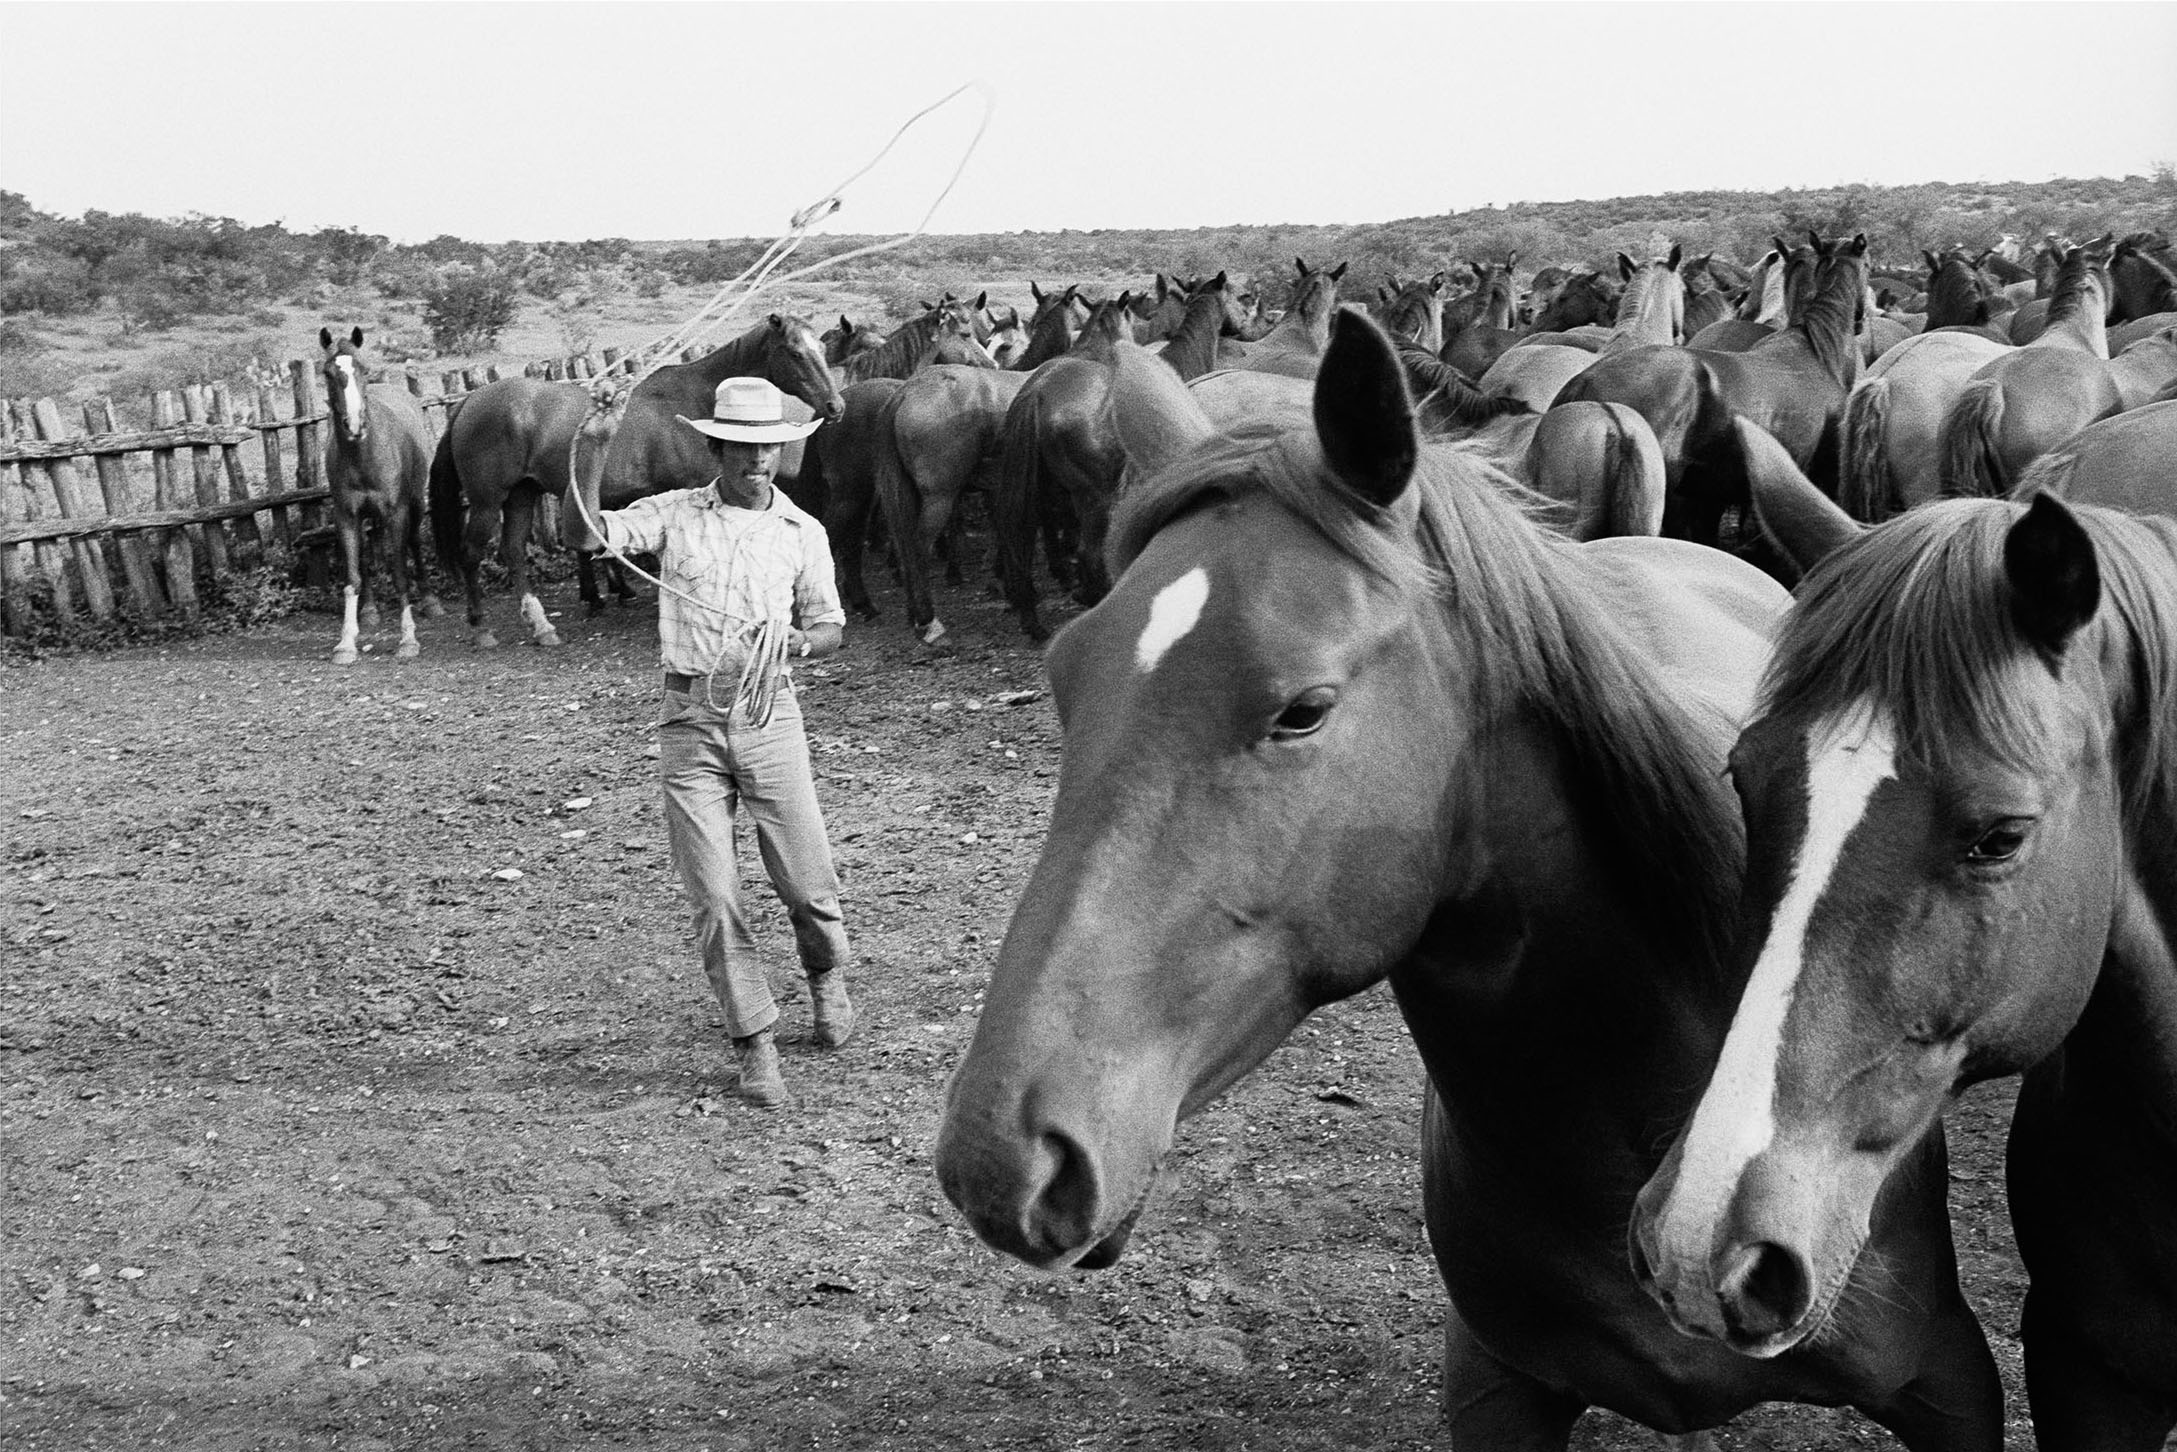 A black and white photo of a man in a cowboy hat next to large horses